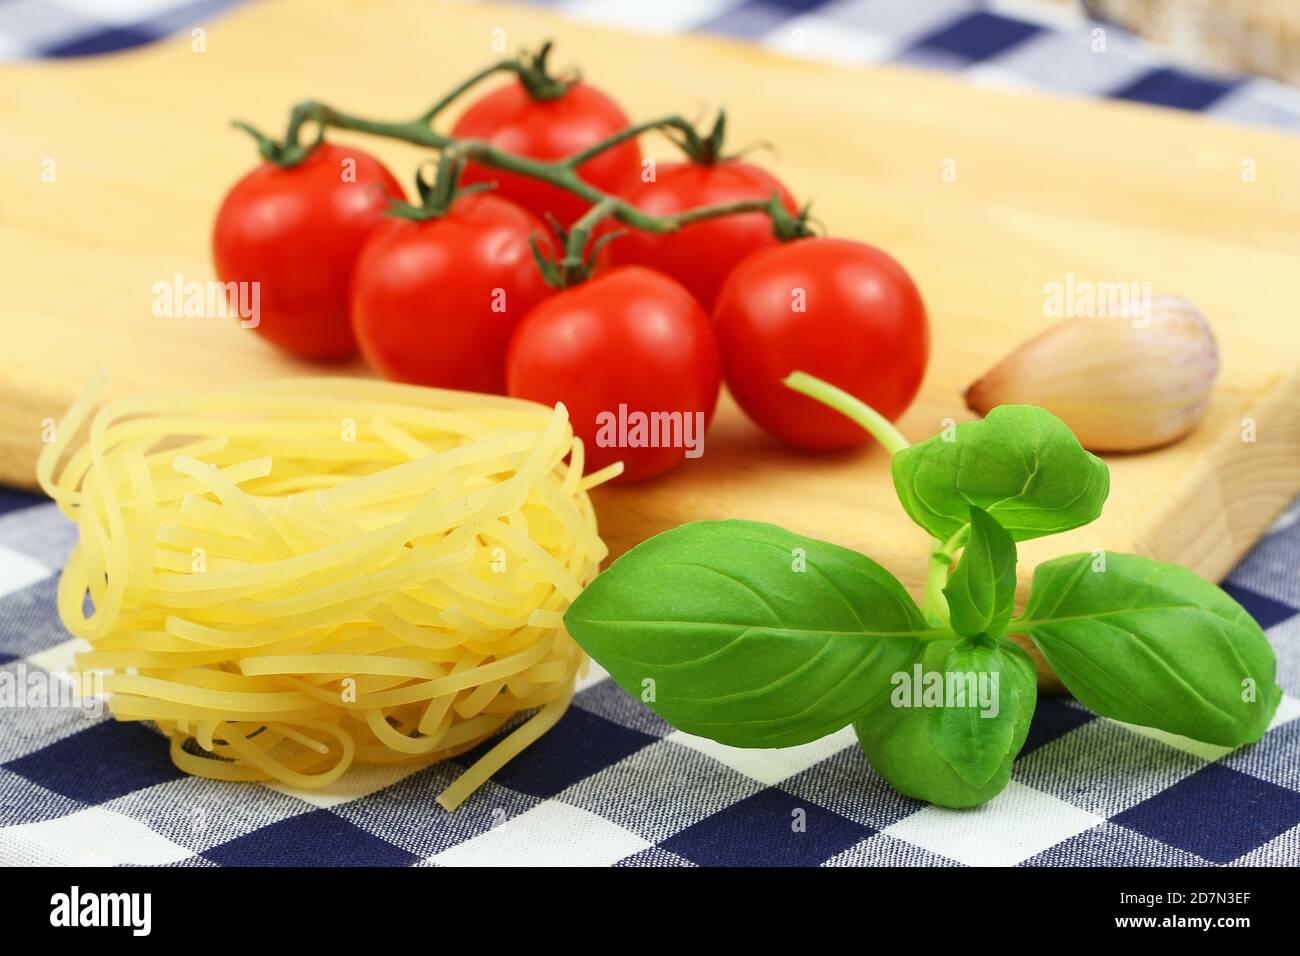 Pasta ingredients: uncooked tagliatelle, cherry tomatoes on stem and fresh basil leaves Stock Photo